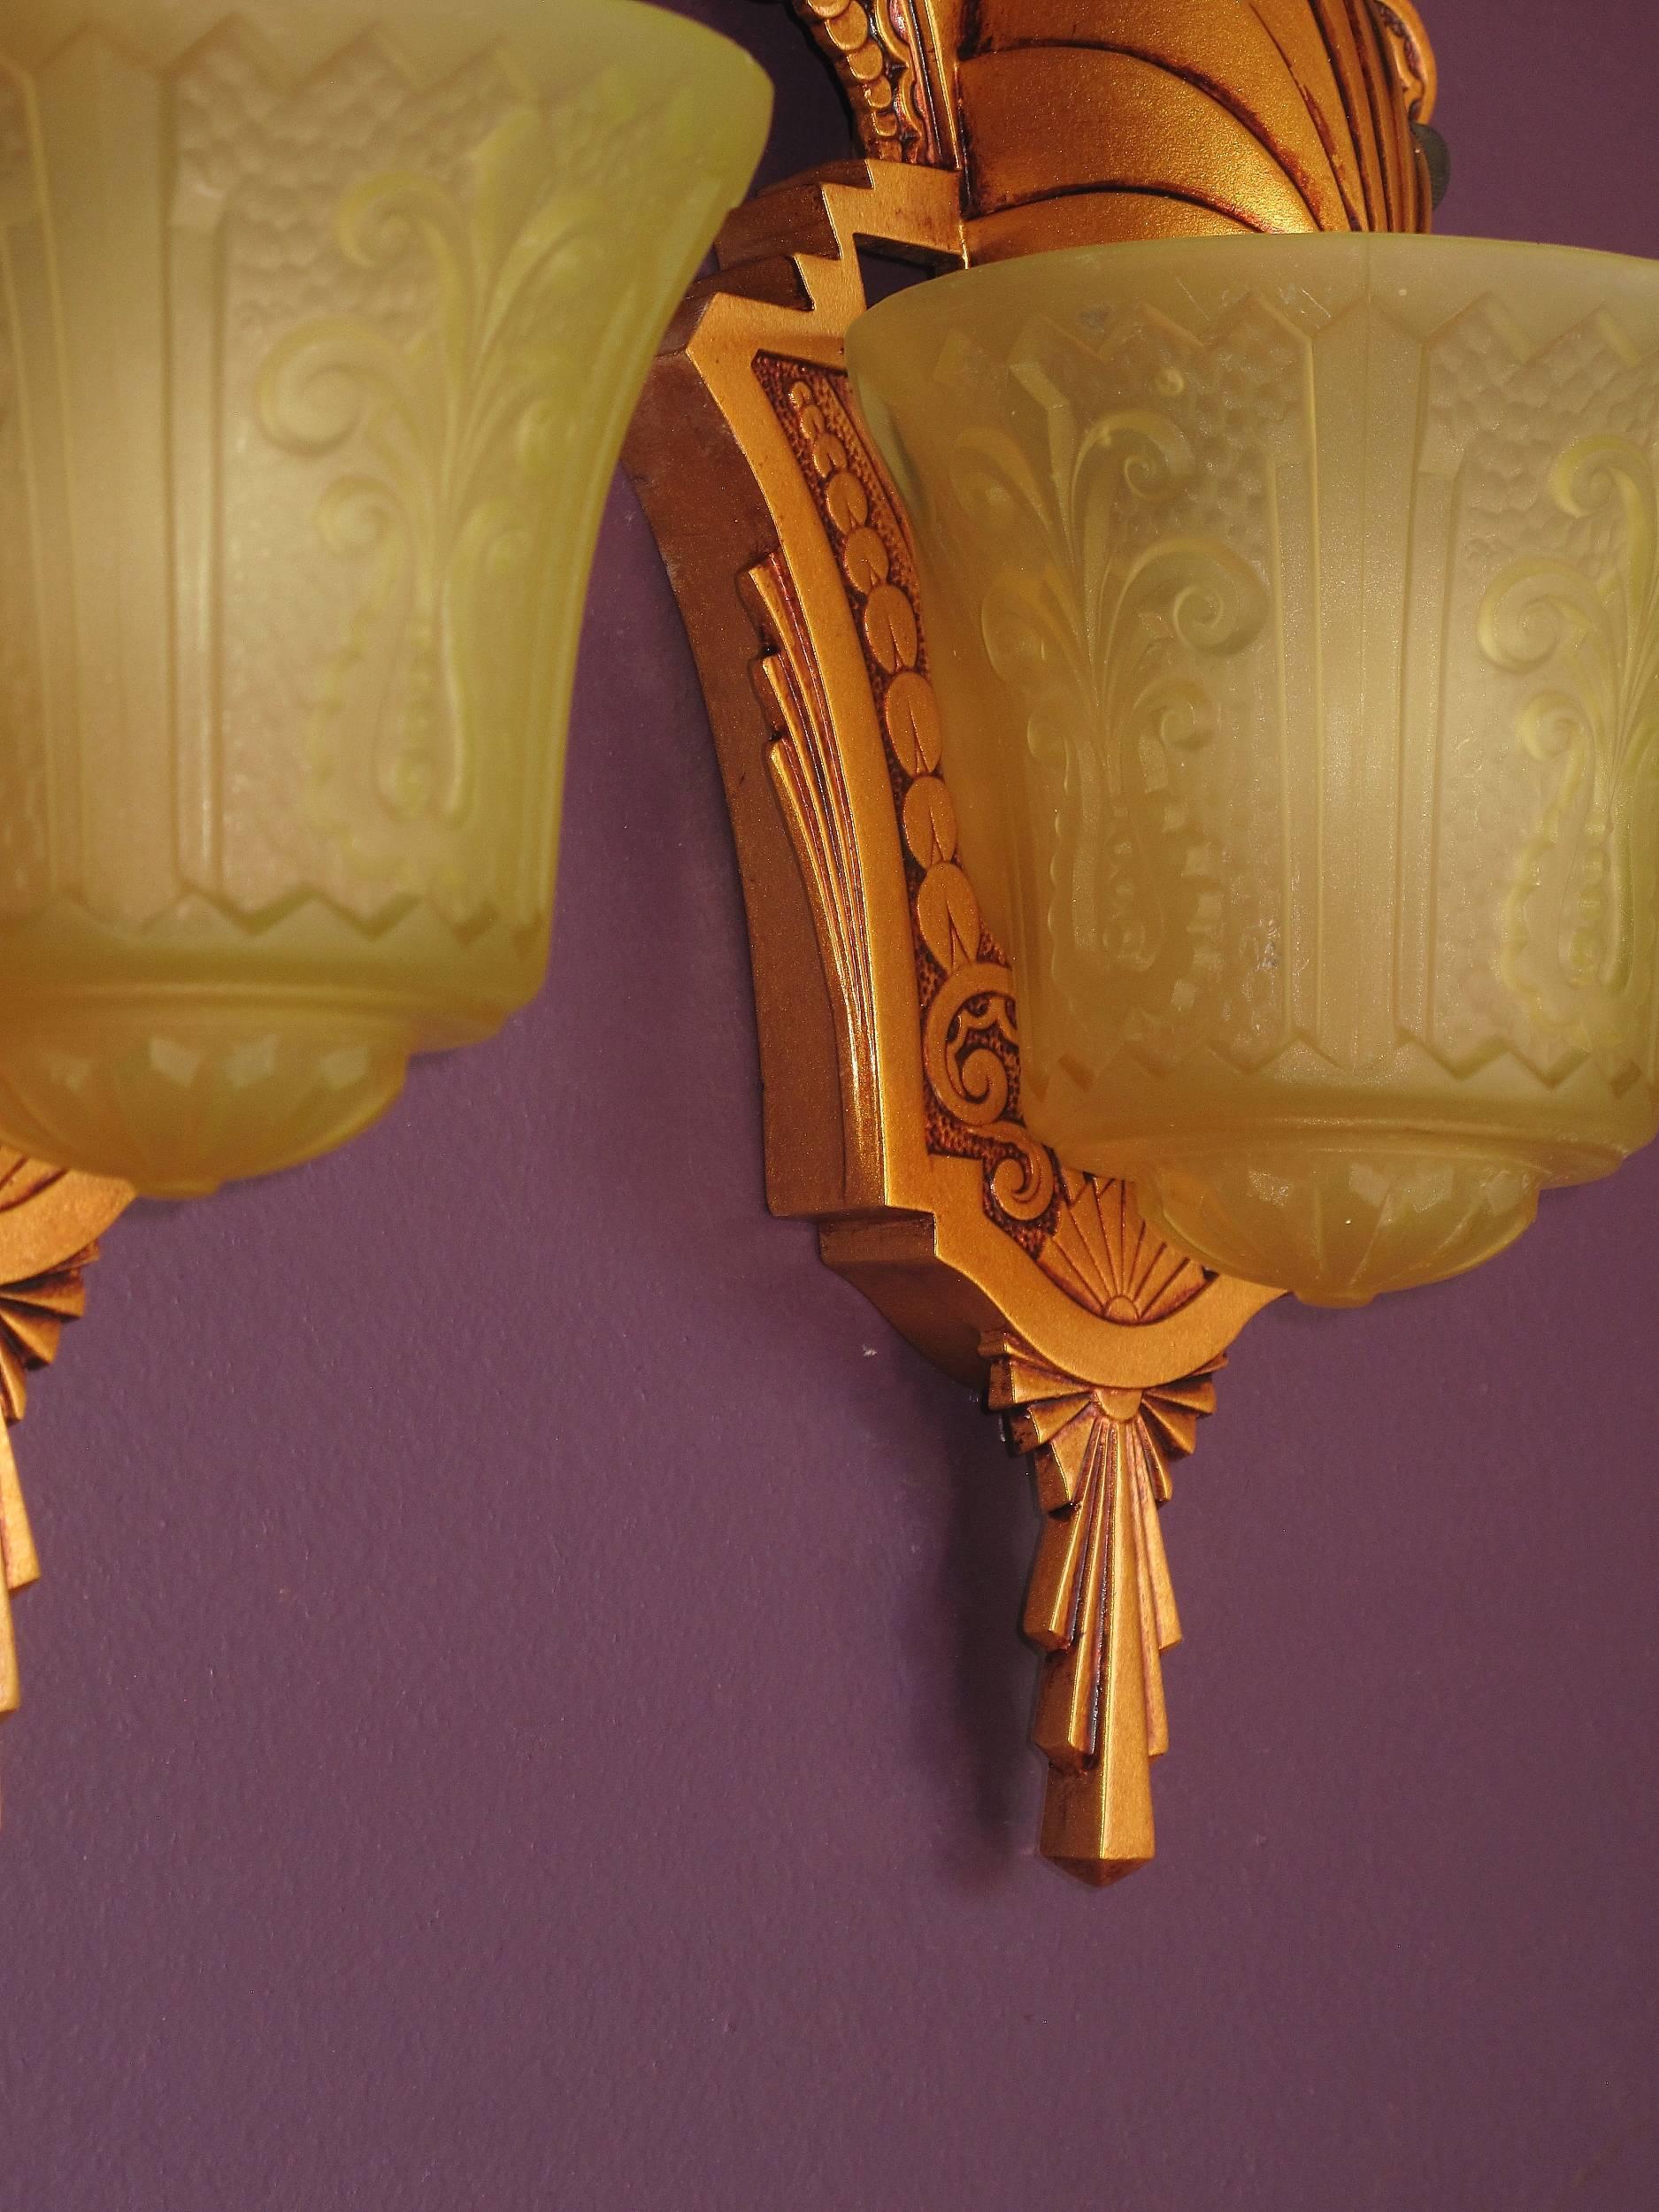 Pair of Beardslee Art Deco Slip Shade Sconces Warm Golden with Amber Shades For Sale 1